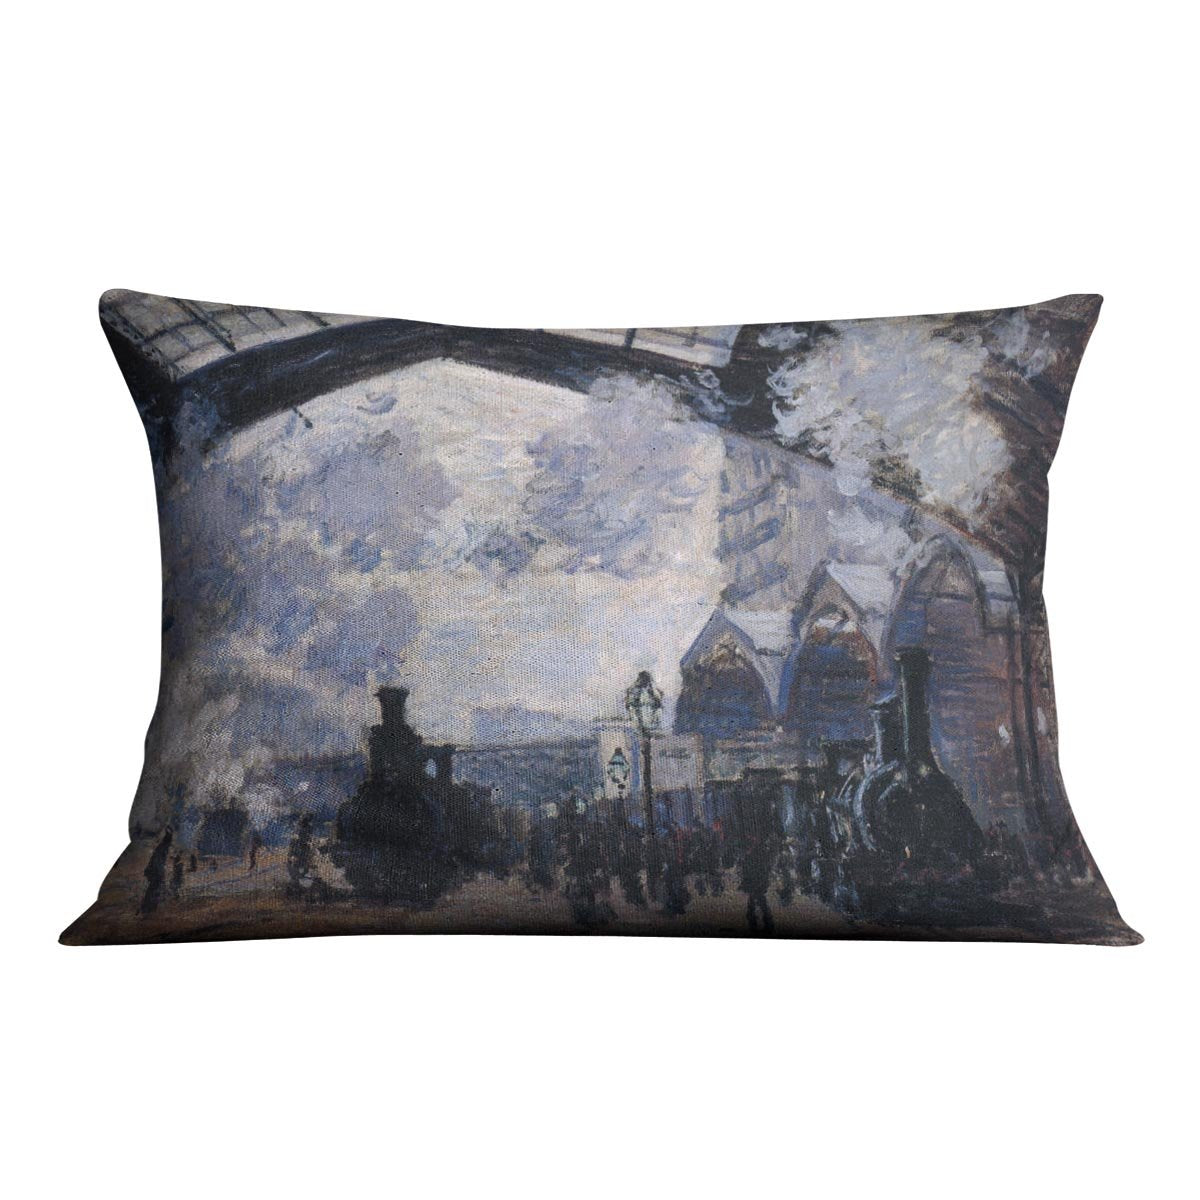 The gare St Lazare 2 by Monet Throw Pillow